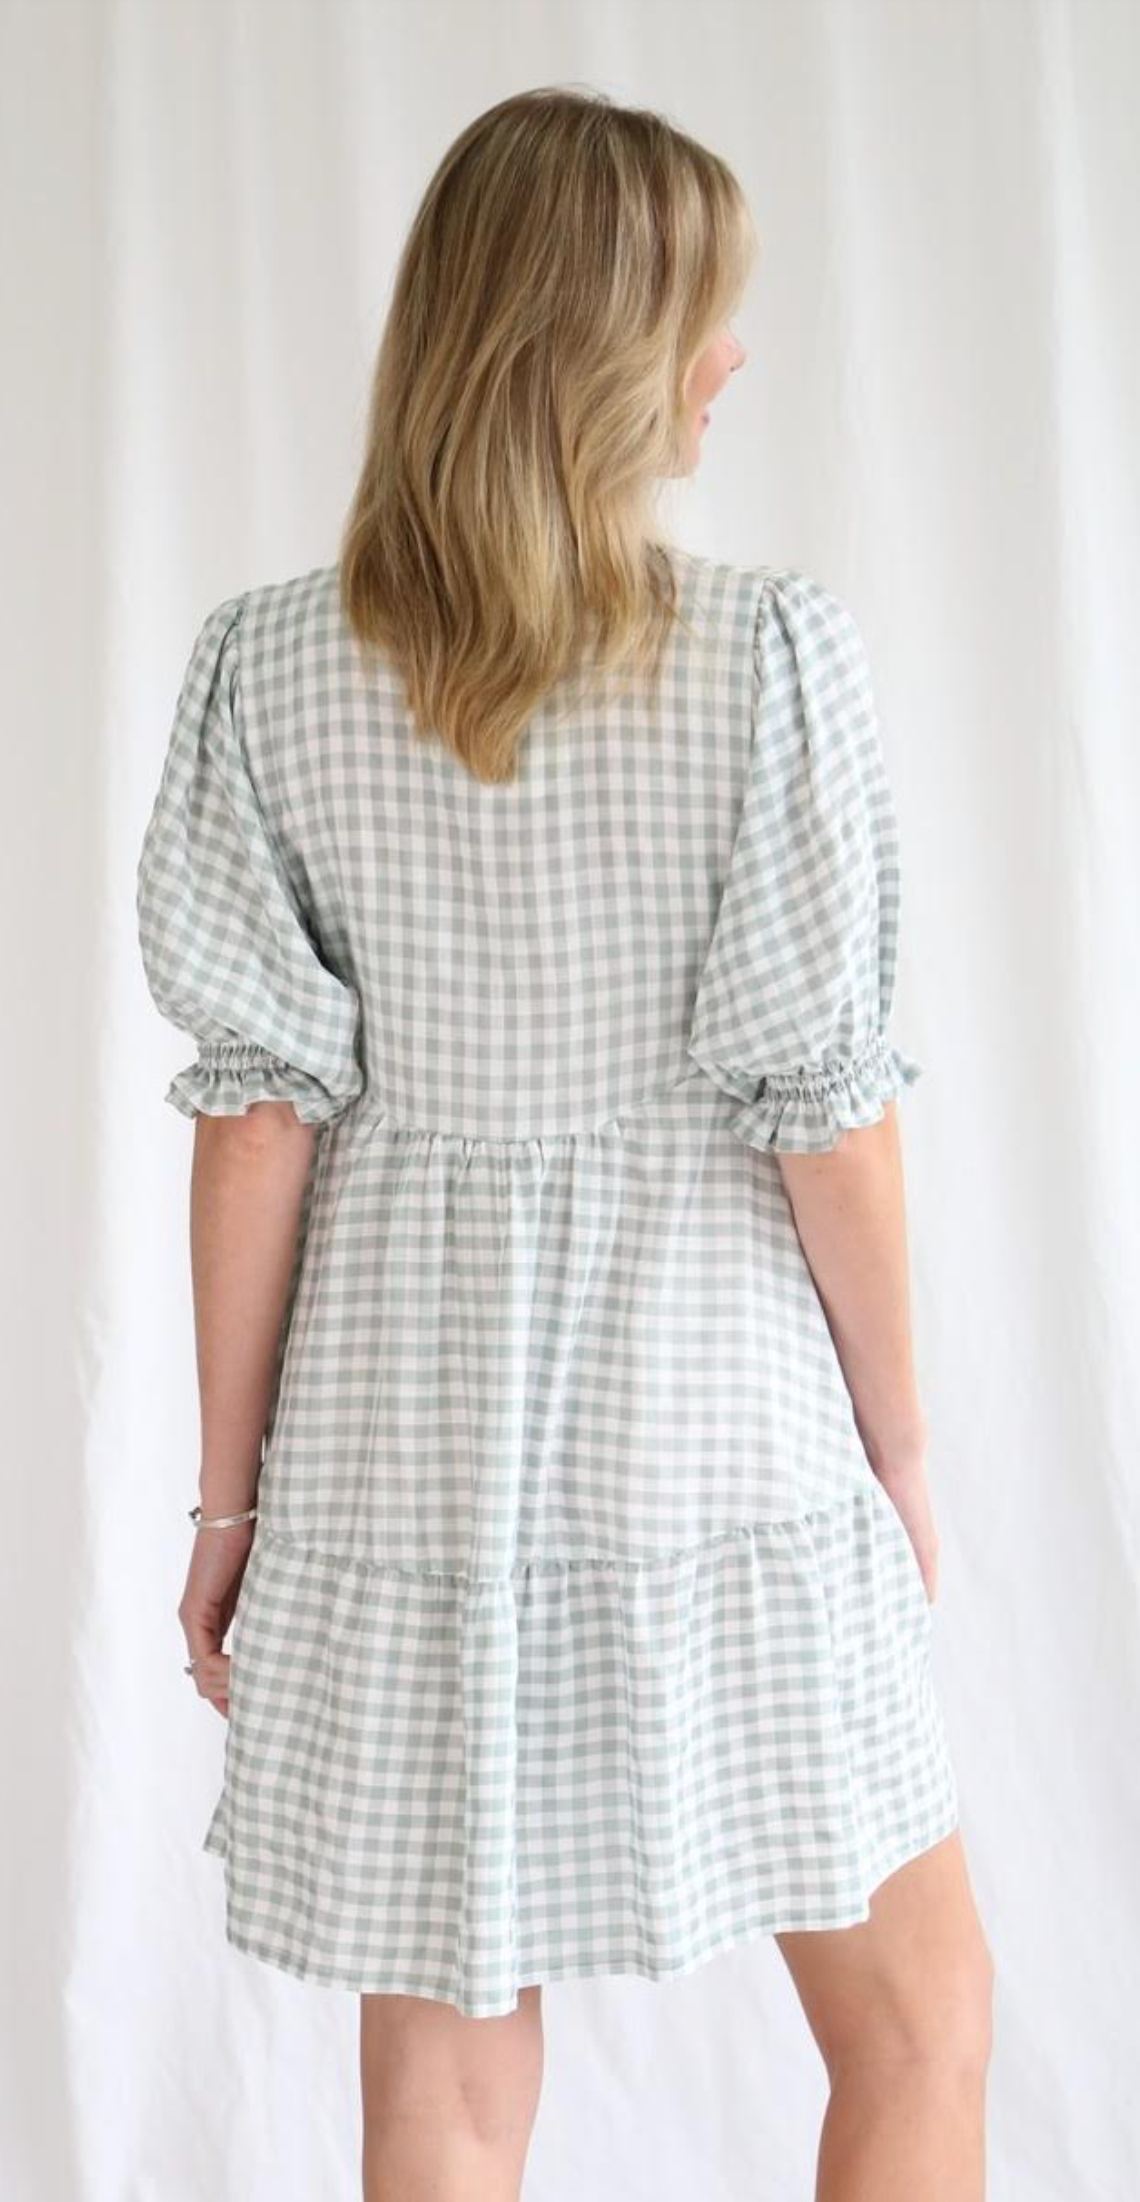 Effortlessly chic and charming, the Ingrid Gingham Mini Dress features a playful v neckline, delightful button details, and a flattering tiered style. With elastic cuff sleeves, this dress offers both comfort and style. Perfect for any occasion, dress it up or down for a versatile and quirky look!